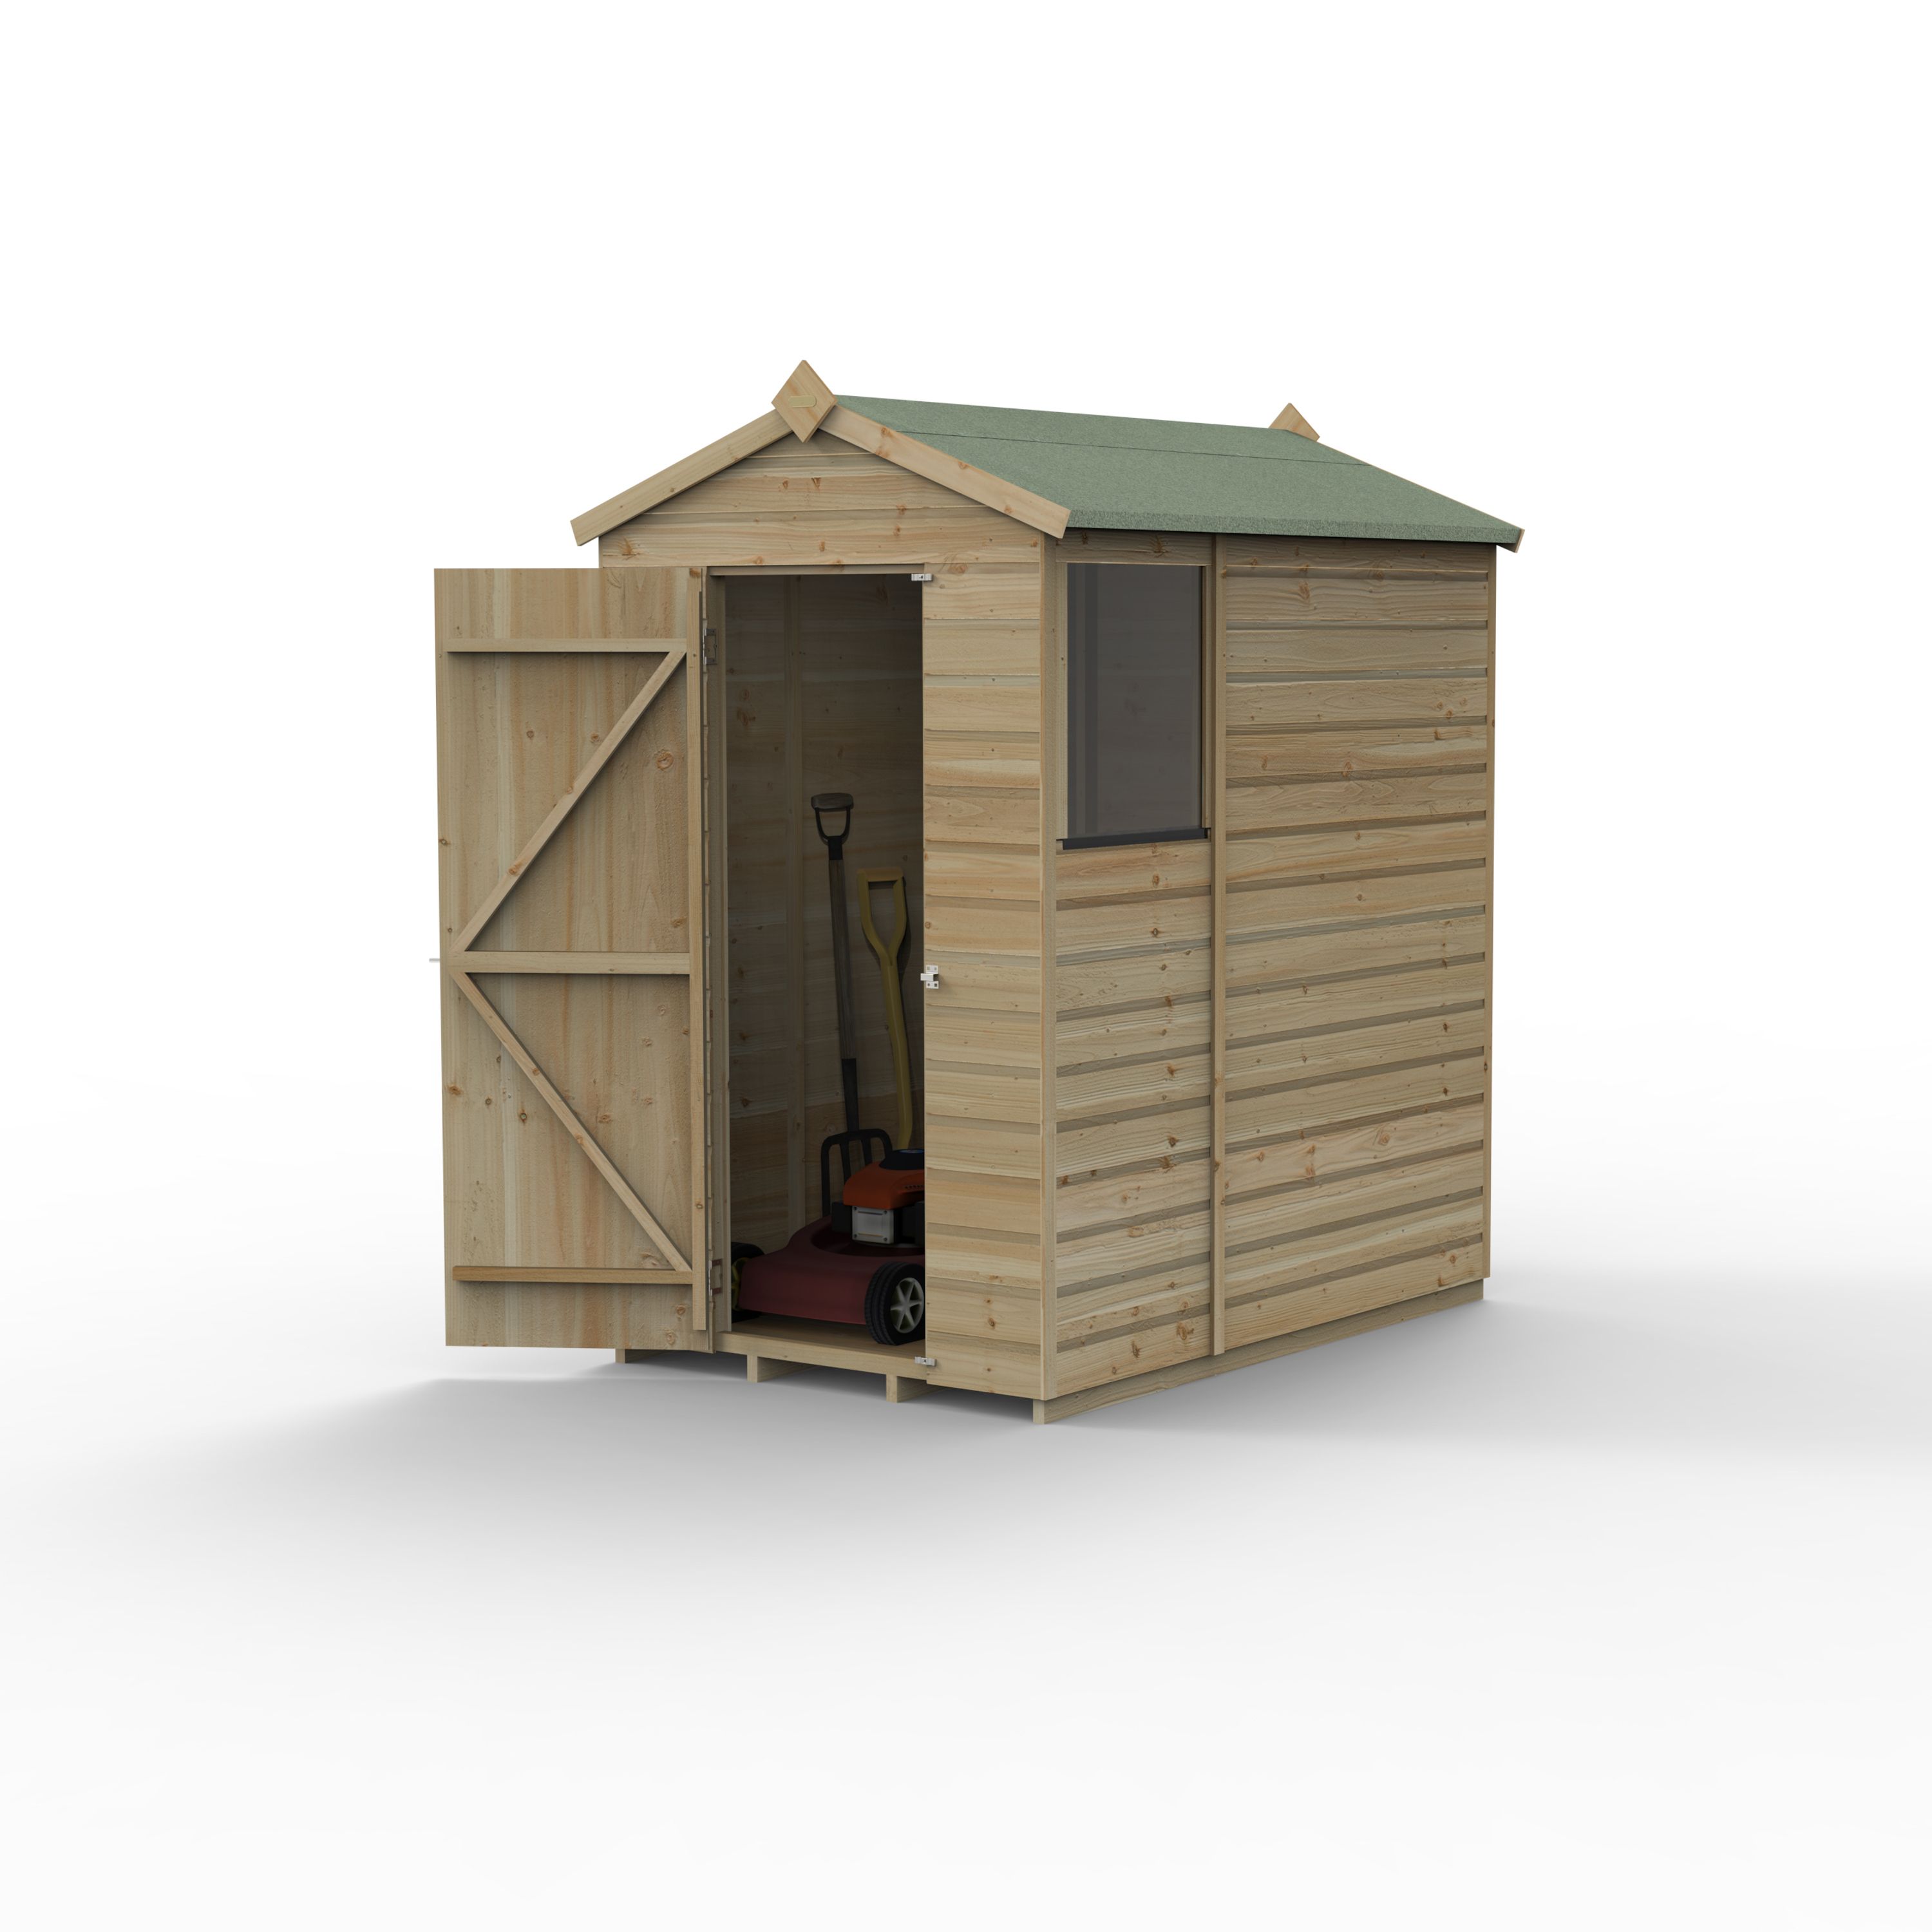 Forest Garden Beckwood 6x4 ft Apex Natural timber Wooden Shed with floor & 1 window (Base included) - Assembly not required